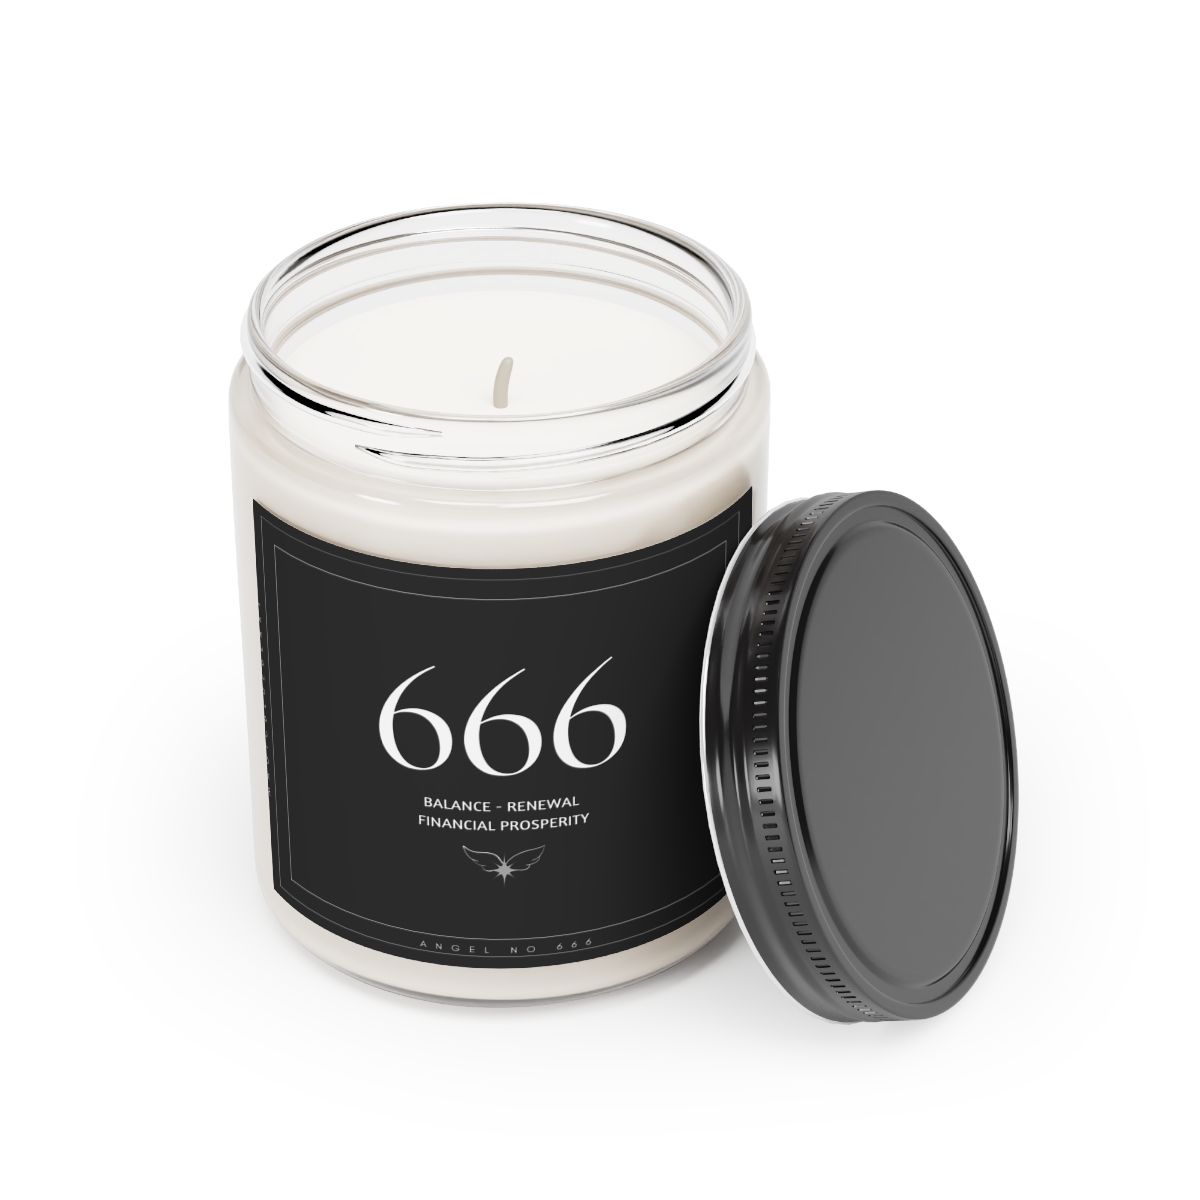 Angel Spell 666 - Scented Vegan Soy Wax Candles, Clear Jar Candle, Spell Candles, Sassy Candle, Vegan Candle, Cotton Wick Candle product thumbnail image